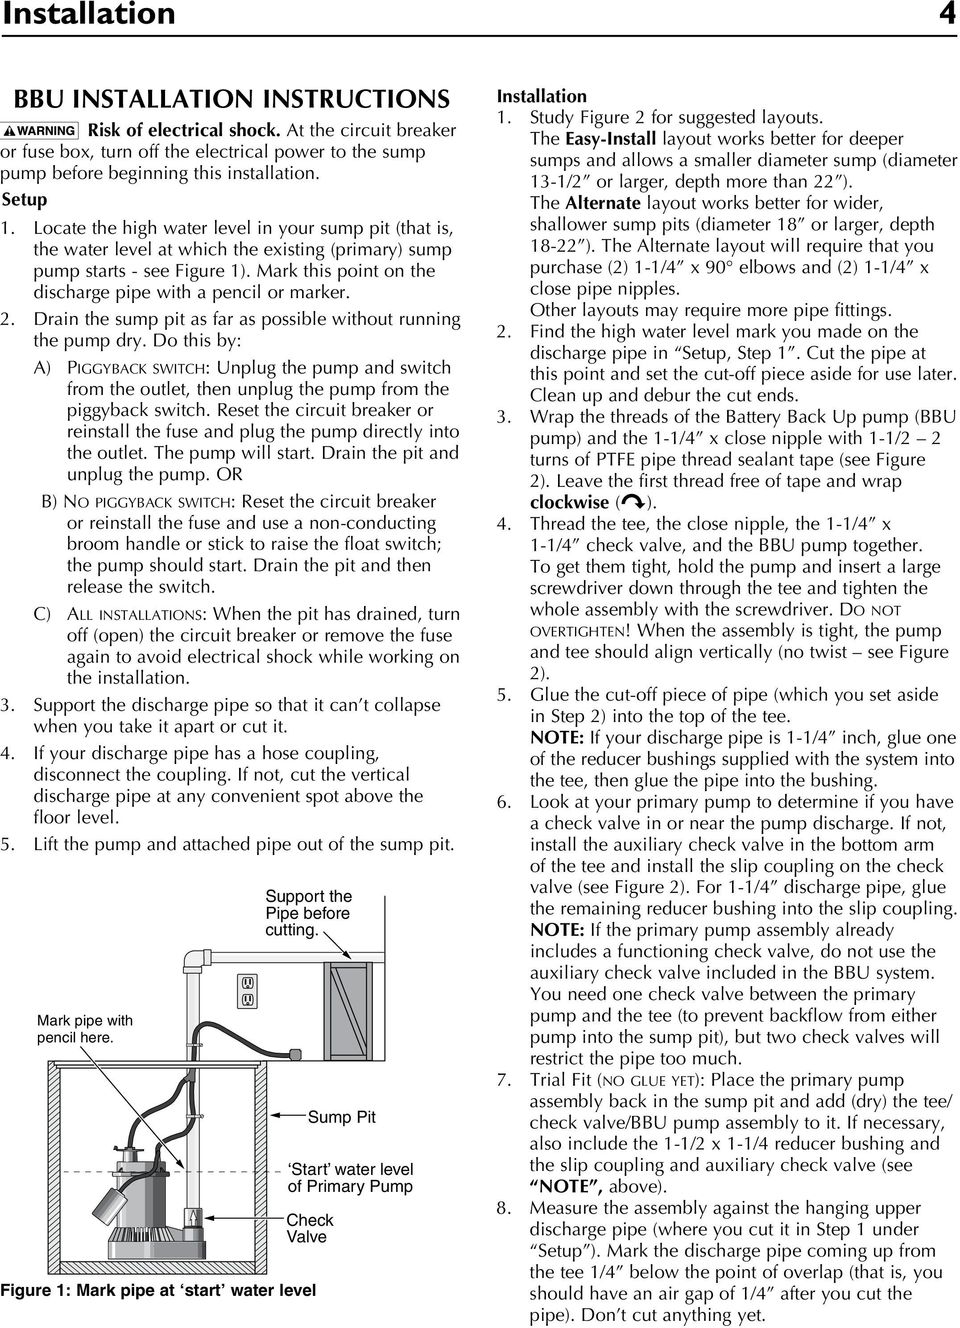 2. Drain the sump pit as far as possible without running the pump dry. Do this by: A) Piggyback switch: Unplug the pump and switch from the outlet, then unplug the pump from the piggyback switch.